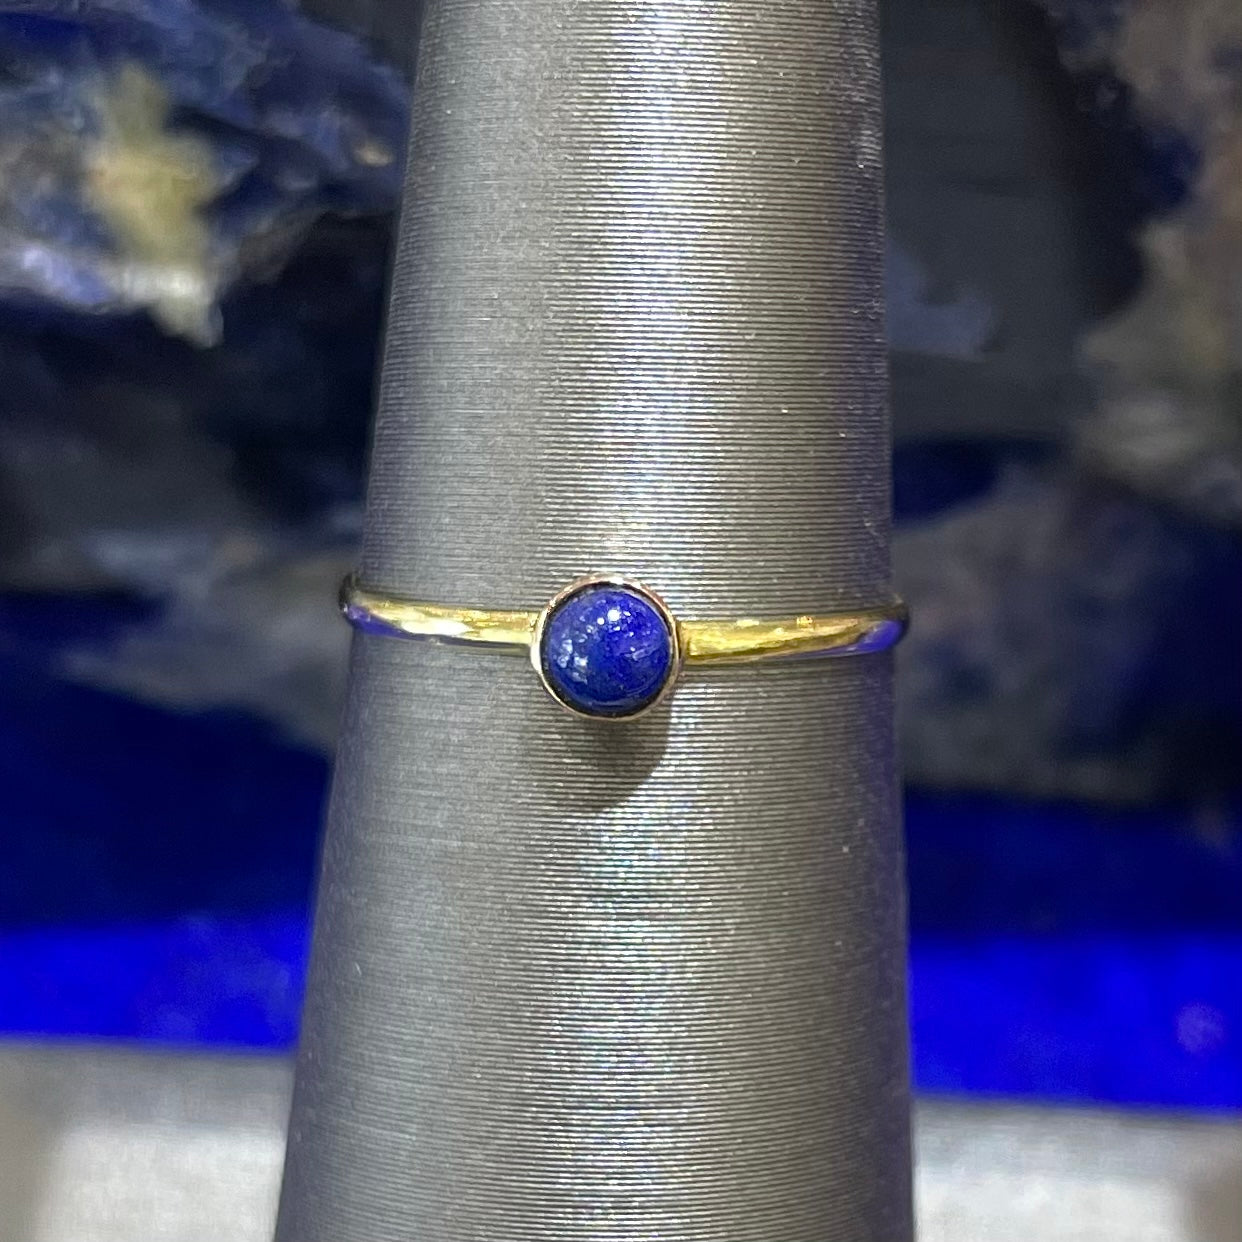 Small, simple round cabochon cut lapis lazuli bezel set onto a thin polished 14kt yellow gold band.  The lapis is a vivid royal blue stone and does not have pyrite inclusions noticeable in the photo.  The ring is on a ring holder against a blue sodalite background.Round cabochon cut blue lapis lazuli stone set in a dainty simple yellow gold solitaire ring.